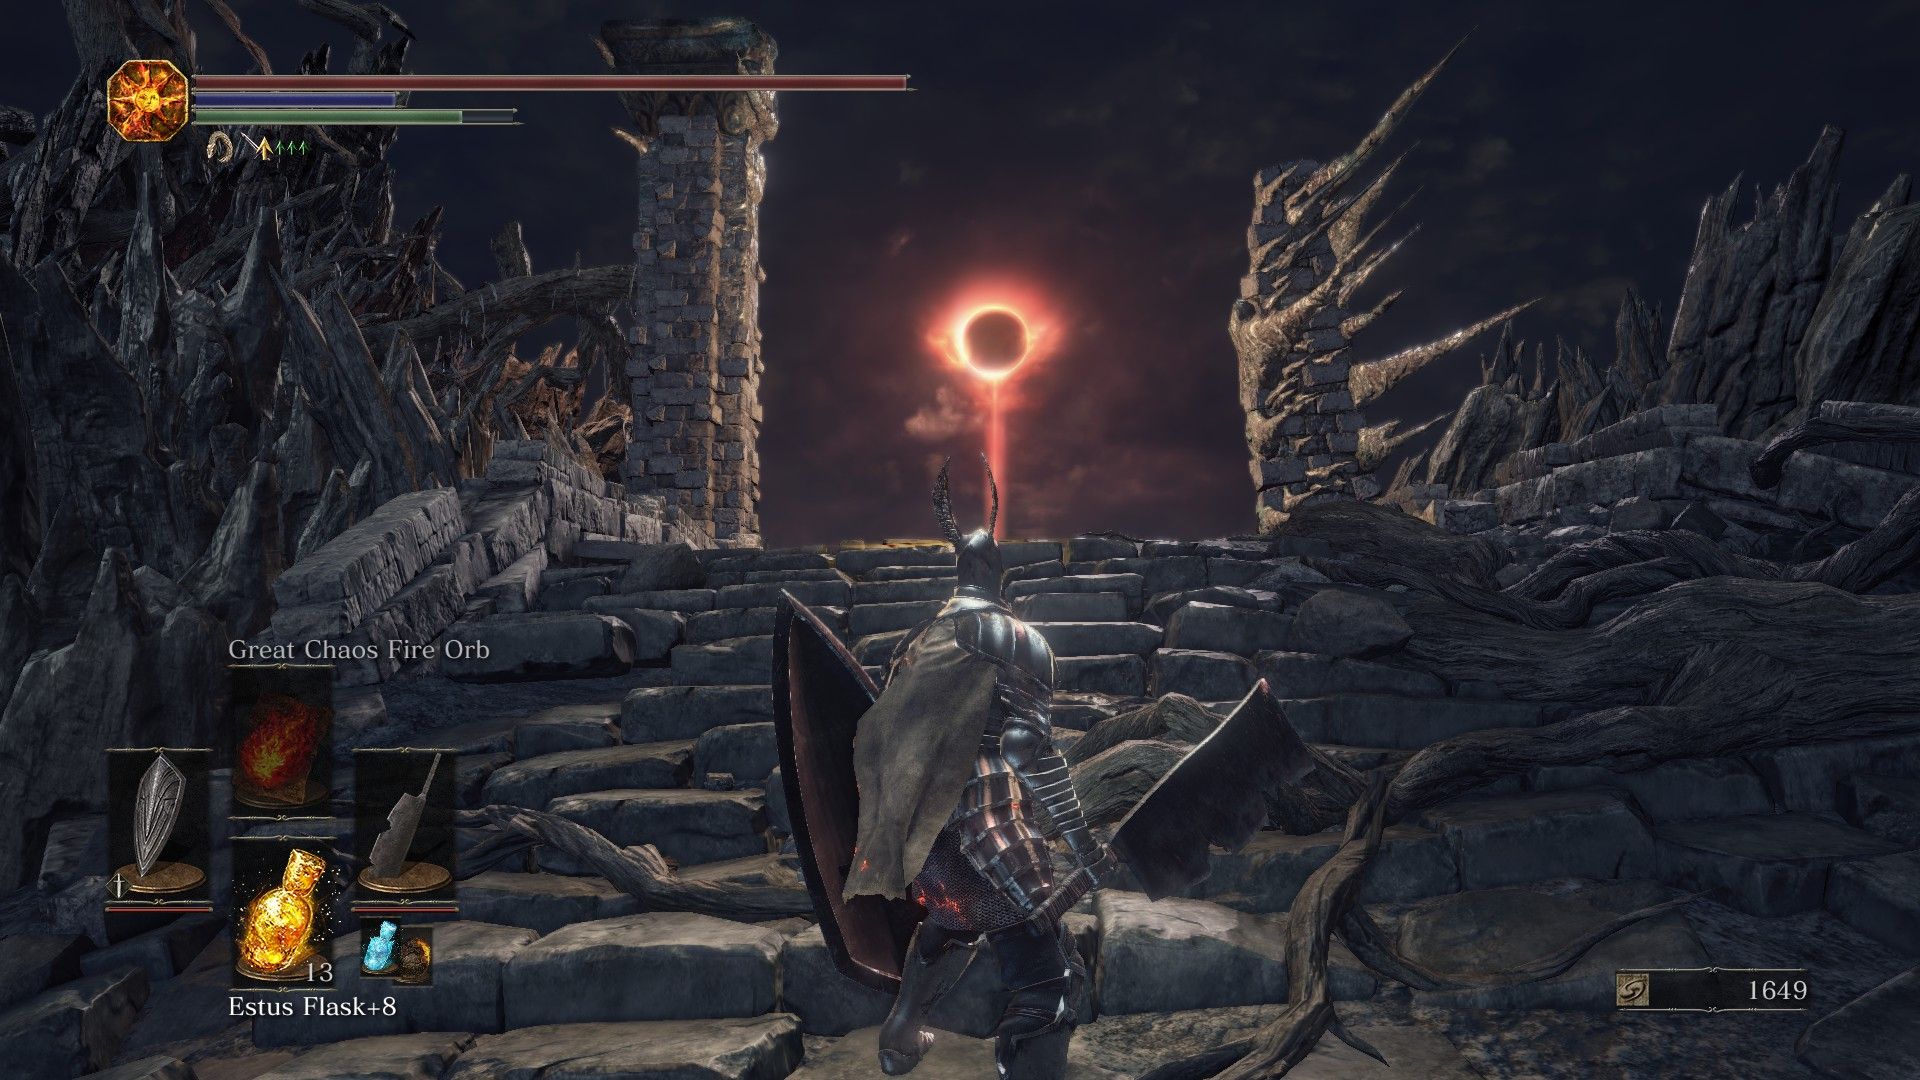 Get Hyped 15 Dark Souls 4 Rumors That Will Blow You Away